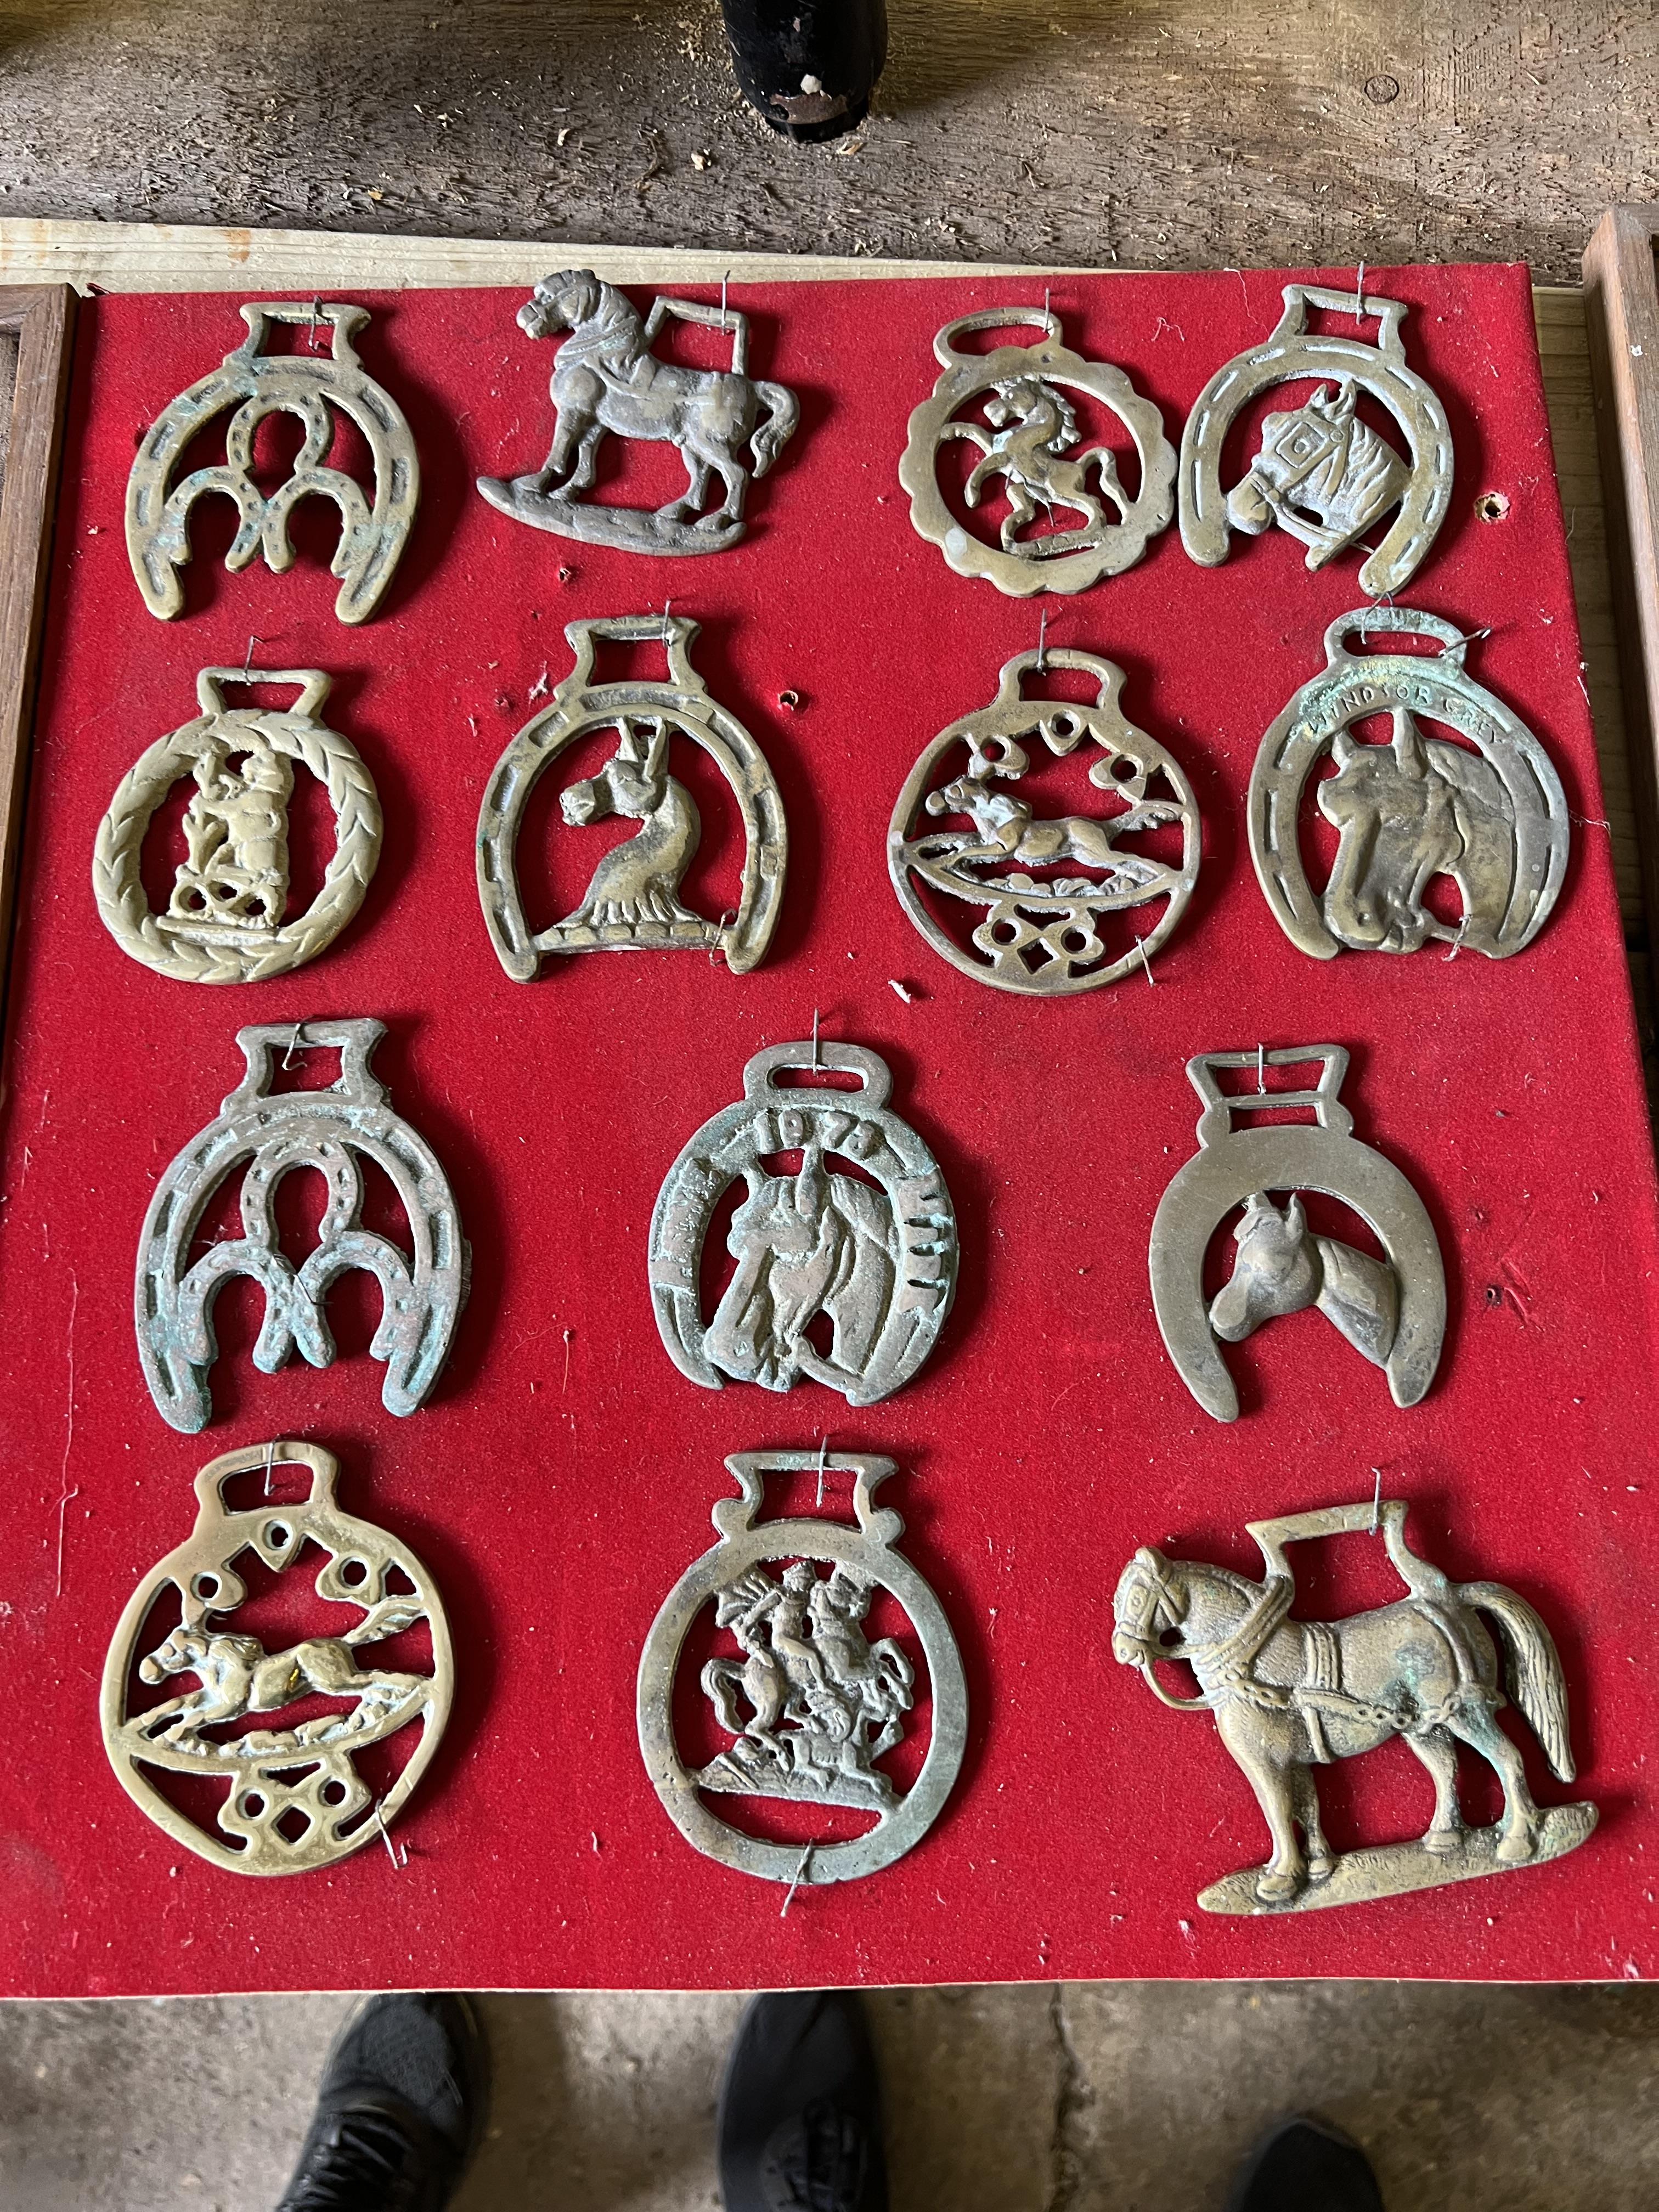 64 horse brasses mounted on wooden boards - Image 3 of 7